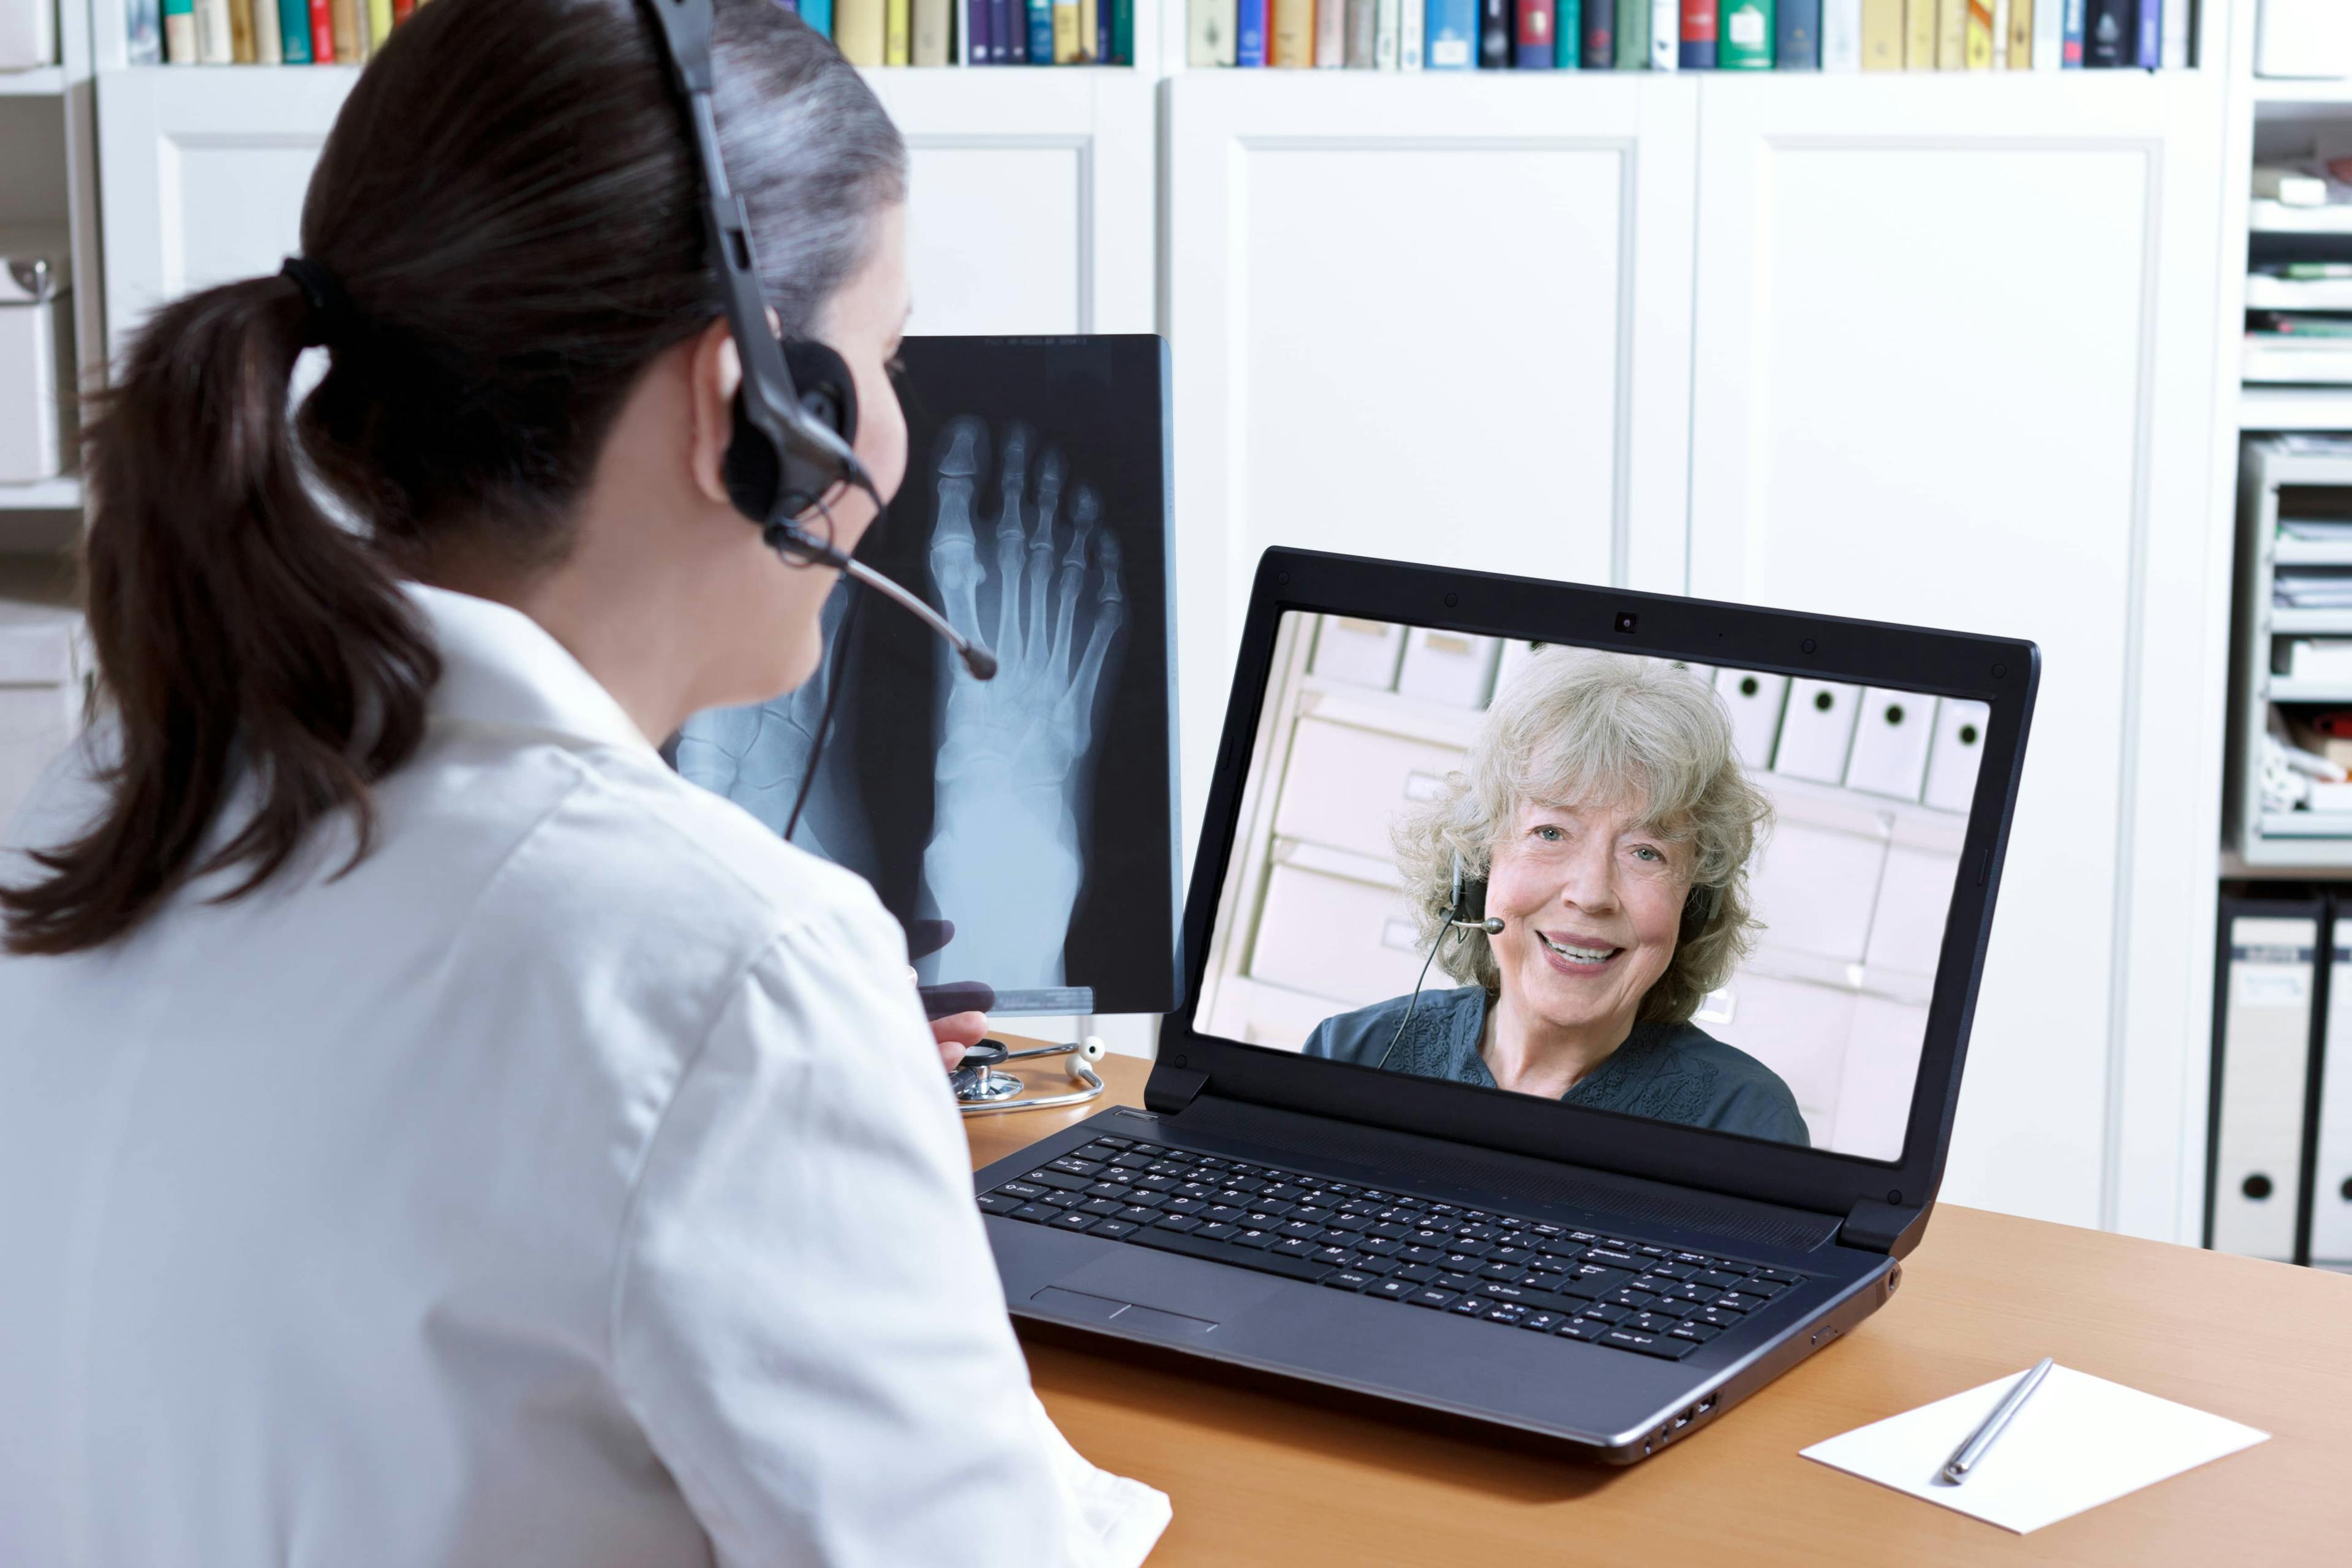 Patients With PD Continue to Think Highly of Telehealth Services, Survey Finds